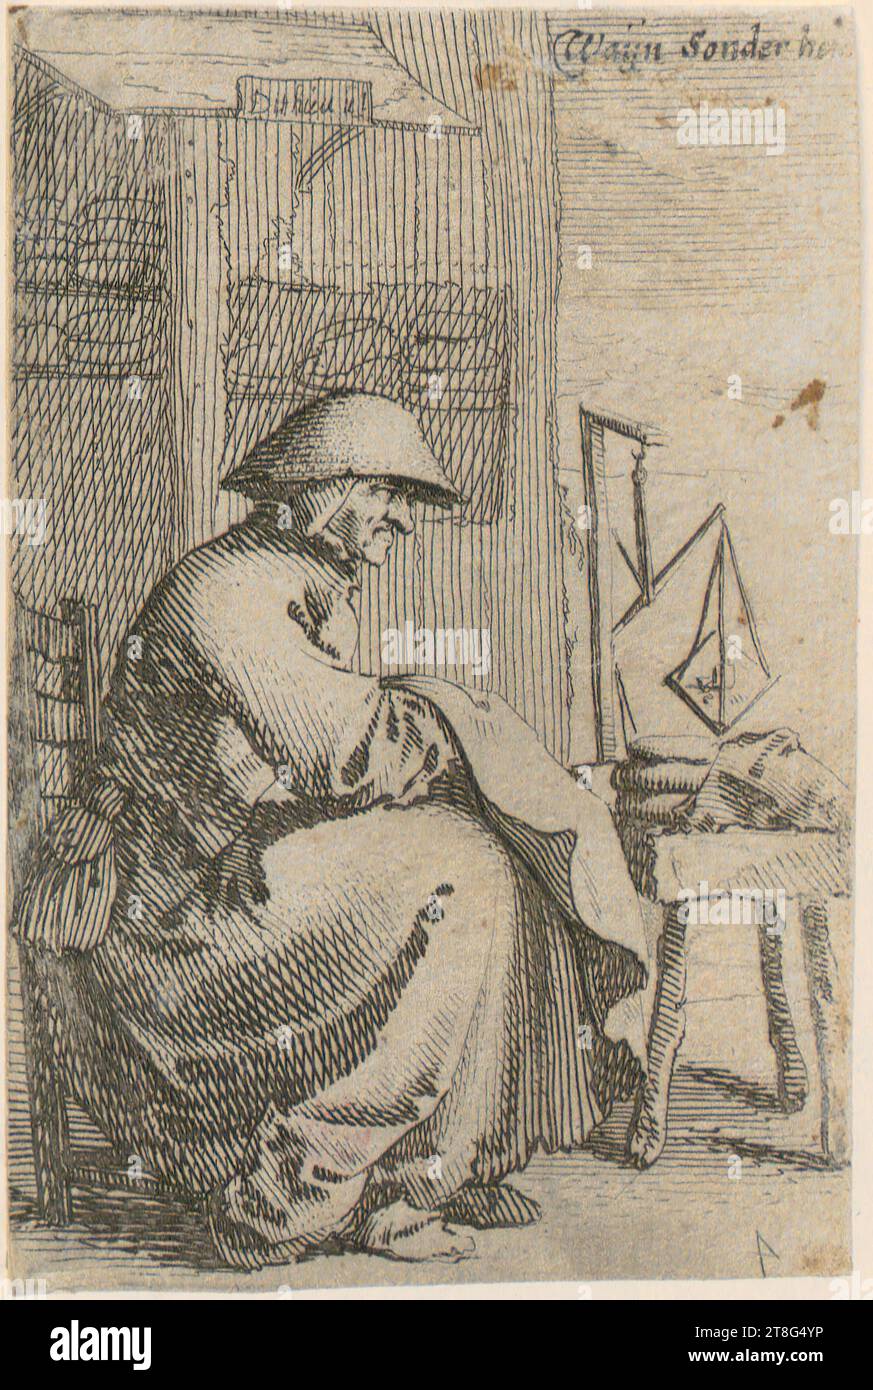 Salomon Savery (1594 - 1665), execution Pieter Jansz. Quast (1605, 1606 um - 1647), after, Seated woman in profile to the right, holding a cloth in her hands, sheet 4 of the set 'The life of the peasants', Origin of the print medium: c. 1630 - 1665, copperplate engraving and etching, sheet size: 12.2 x 8.0 cm (trimmed)' Inscribed 'Waÿn Sonder hemt' at upper right and numbered '4' at lower right number reversed Stock Photo